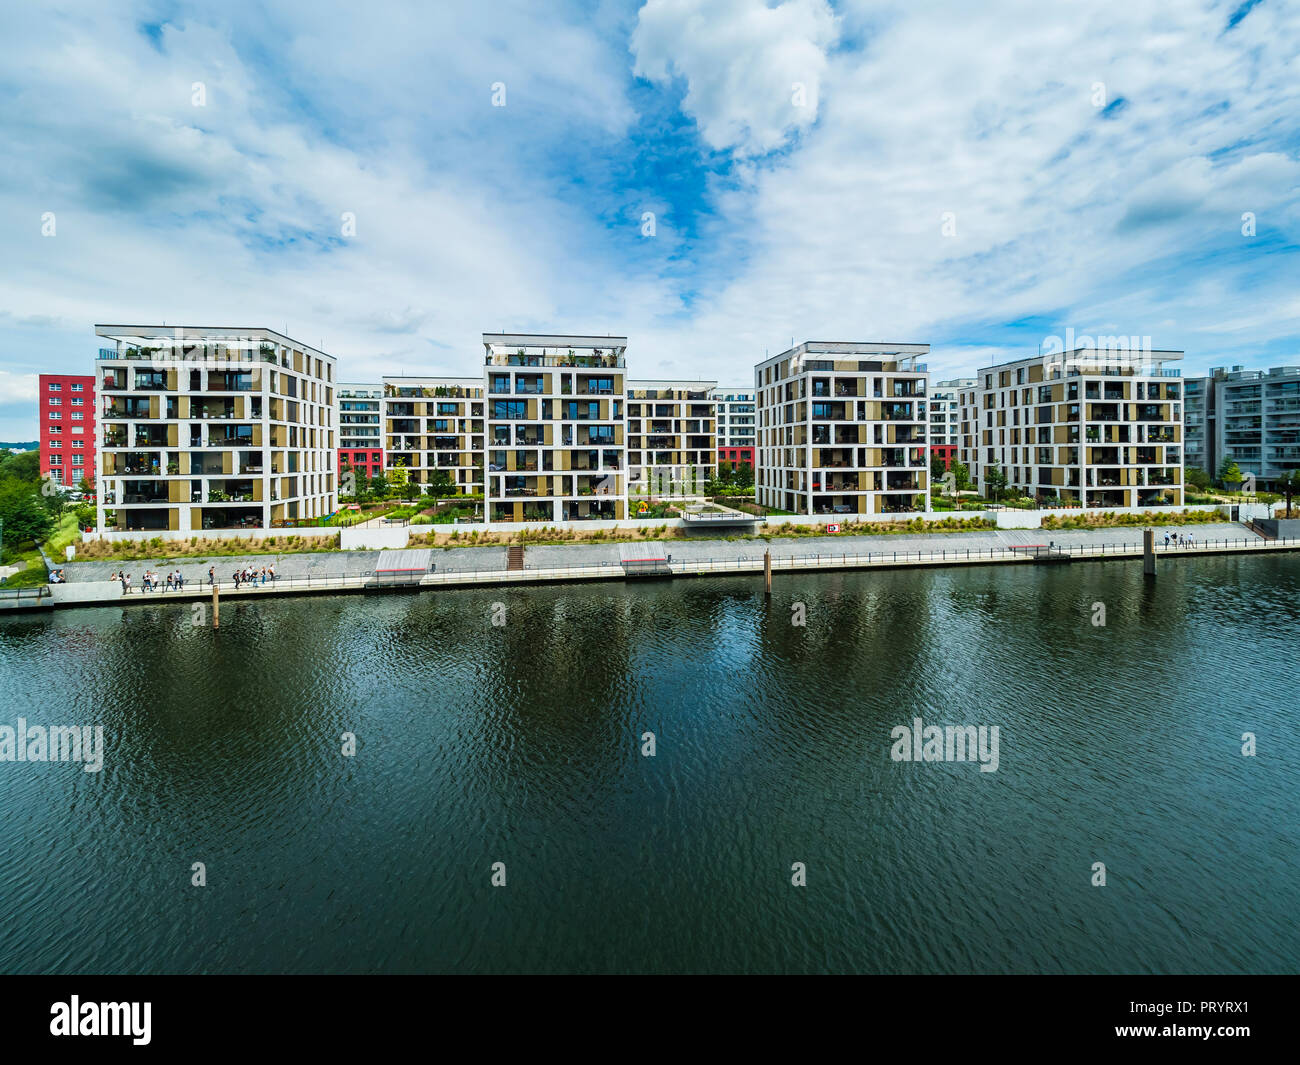 Germany, Hesse, Offenbach, modern architecture at harbor Stock Photo